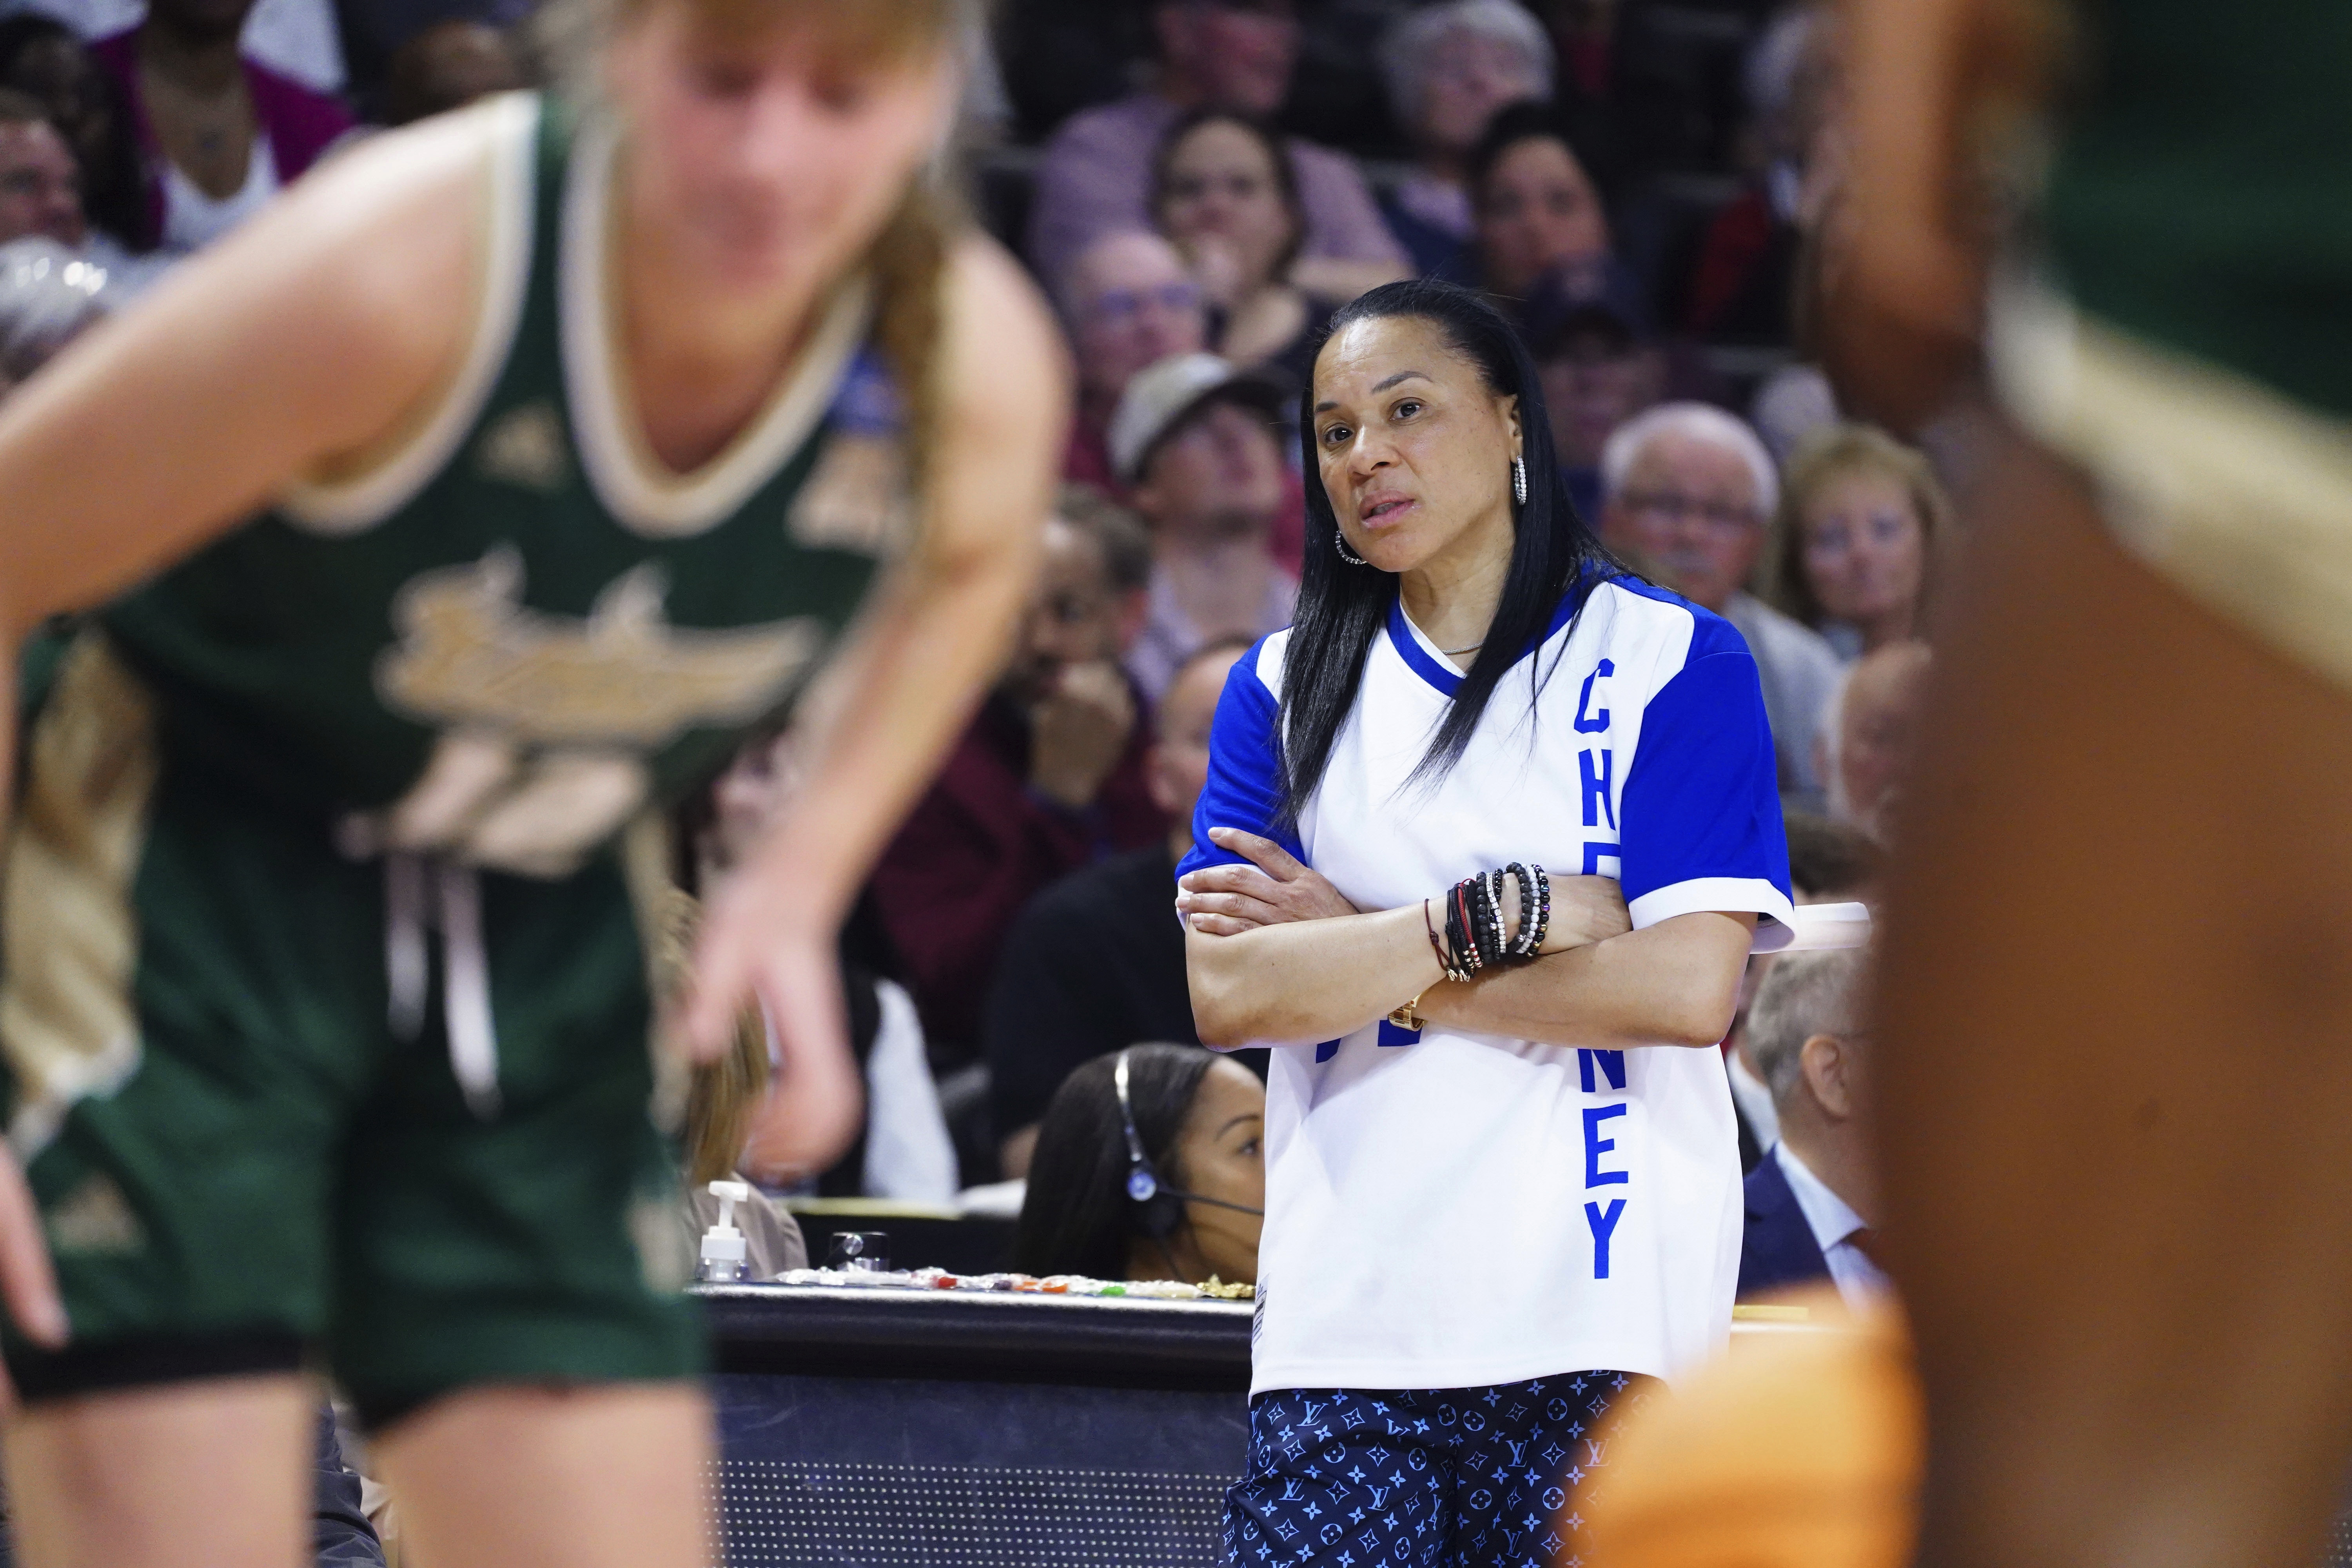 March Madness: Dawn Staley's wears a Cheyney jersey while coaching